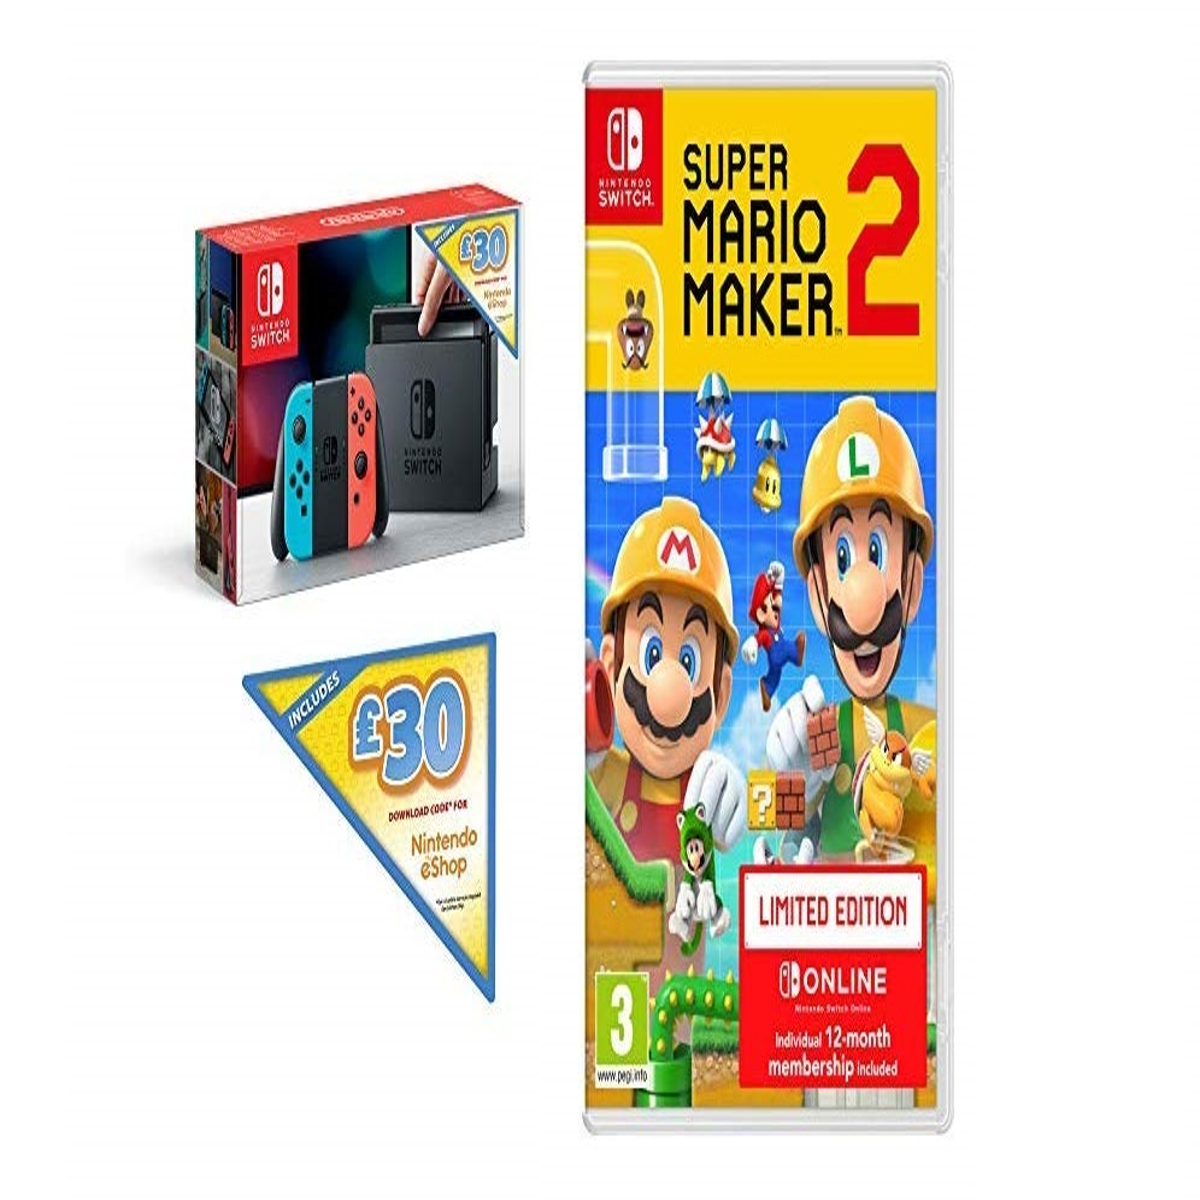 This deal includes Mario Maker 12 months' Switch Online and a £30 eShop voucher for just £300 | Eurogamer.net